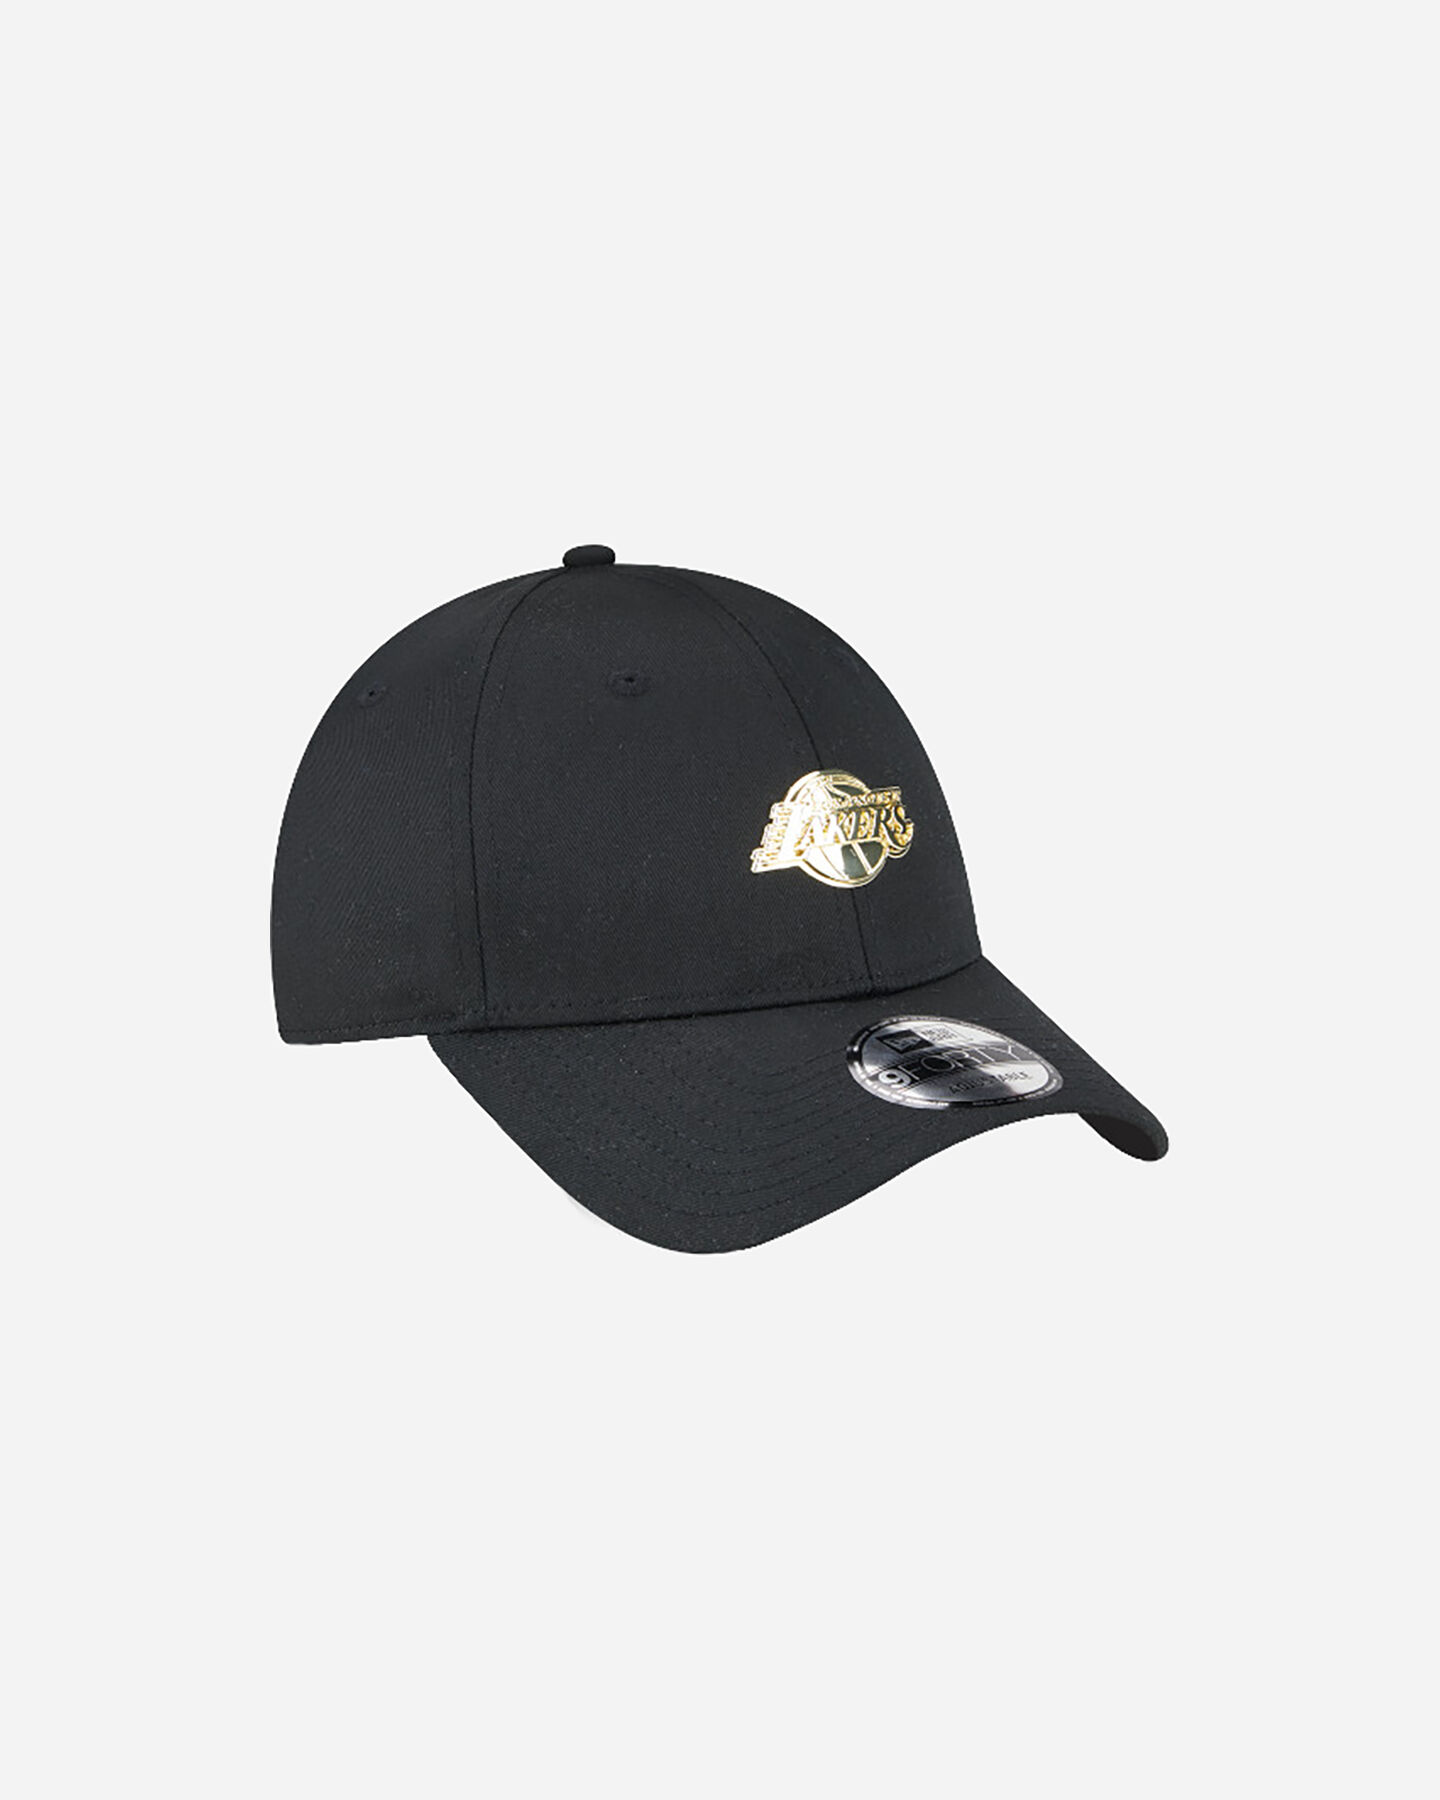  Cappellino NEW ERA 9FORTY METALLIC PIN LOS ANGELES LAKERS  S5630868|001|OSFM scatto 2